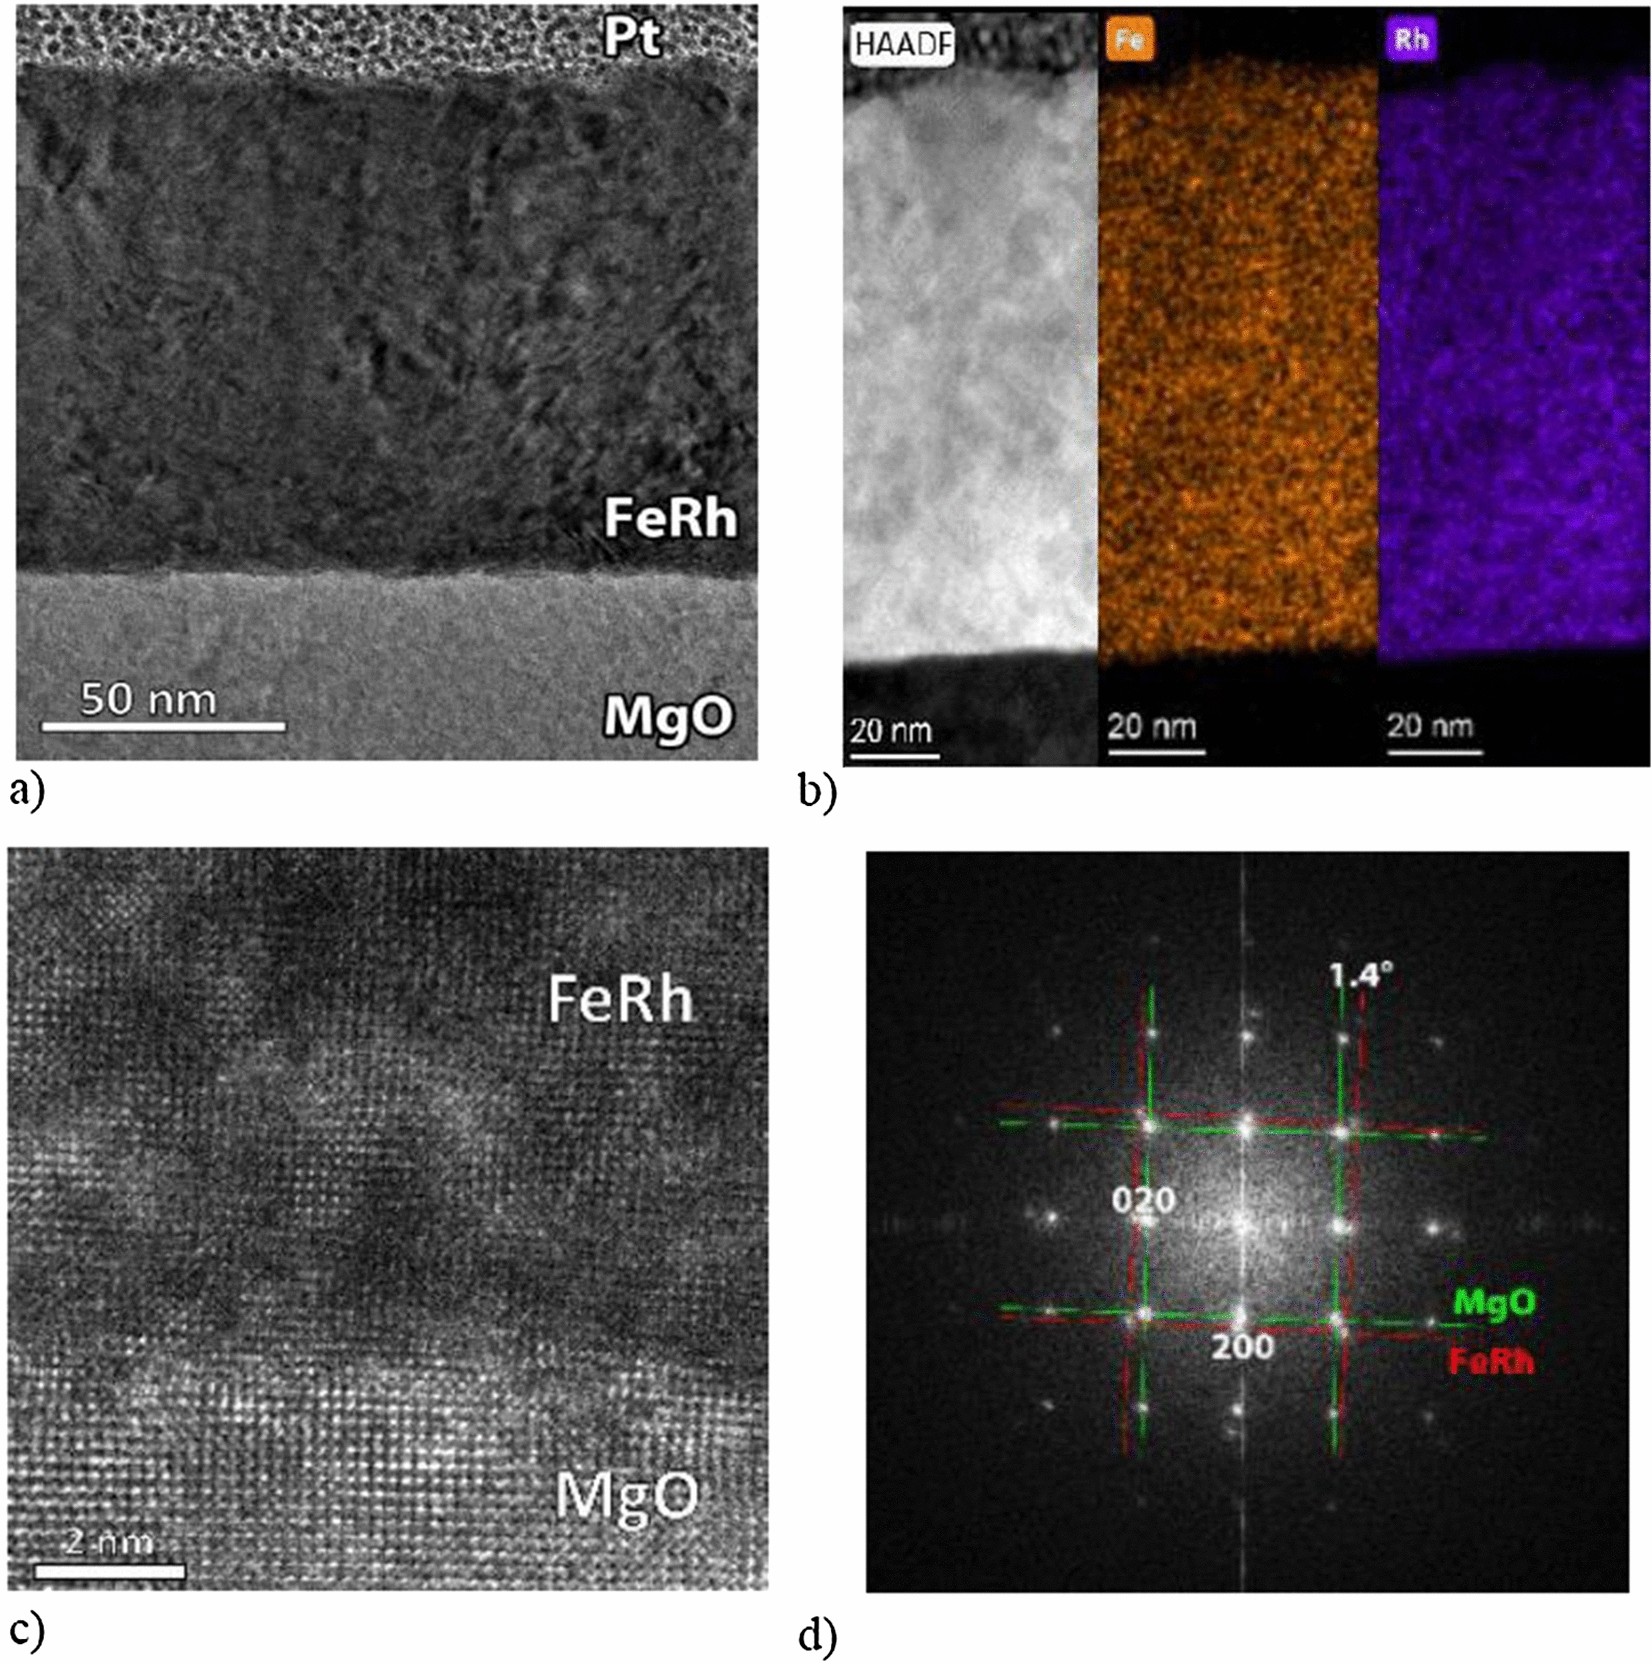 præst kommando nødsituation Reversible control of magnetism in FeRh thin films | Scientific Reports